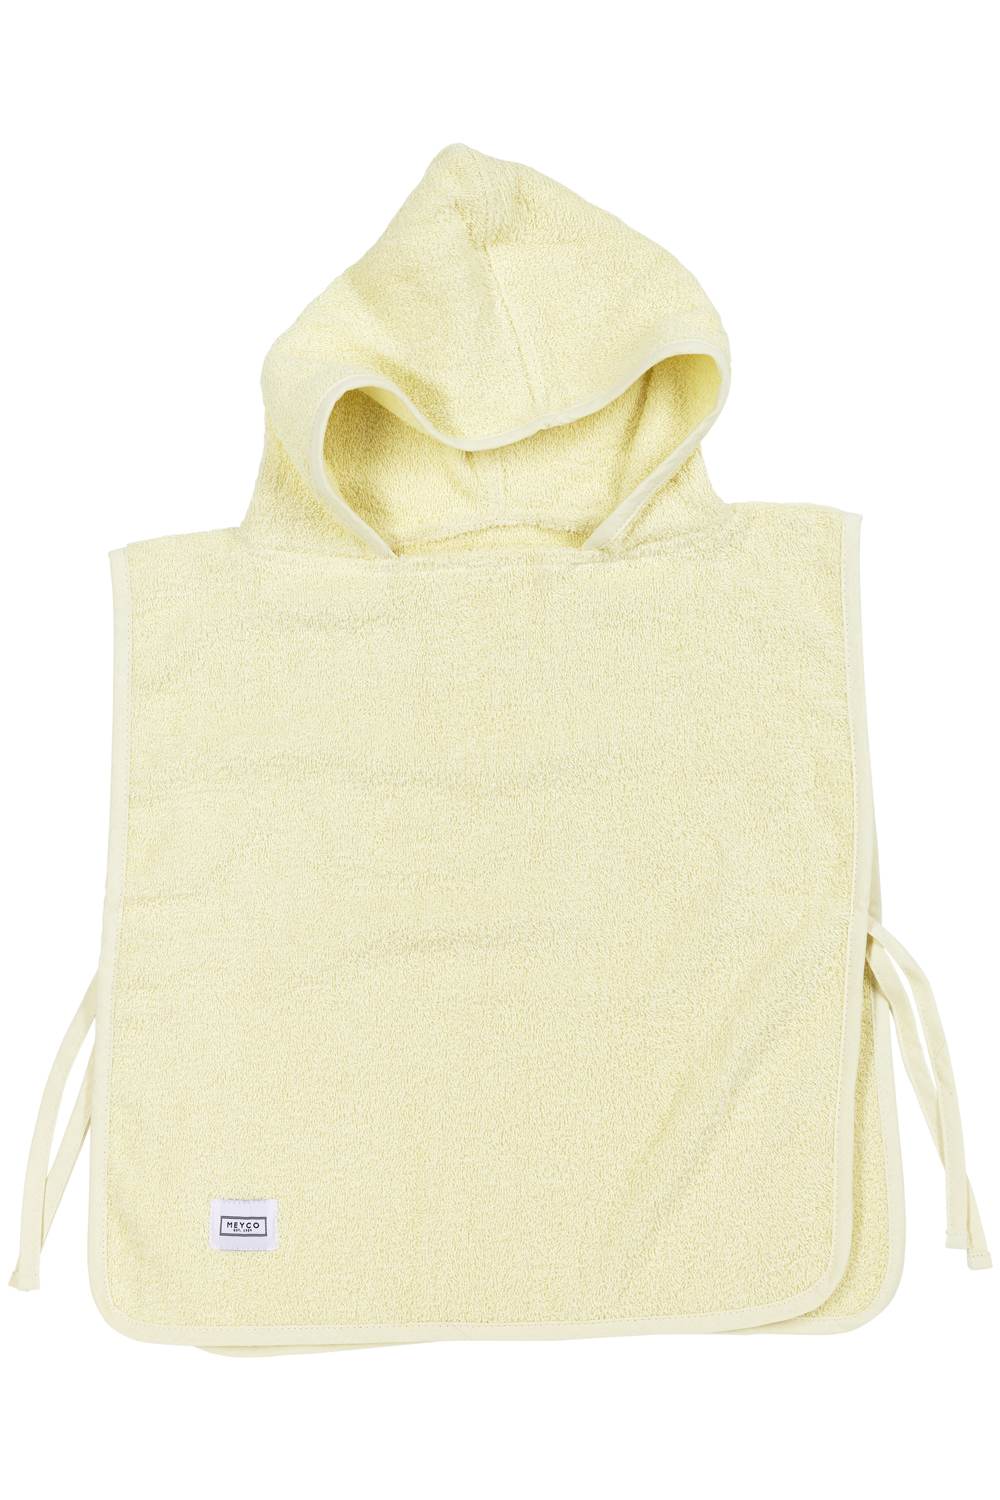 Frottee Bade Poncho - Soft Yellow - 1-3 Jahre